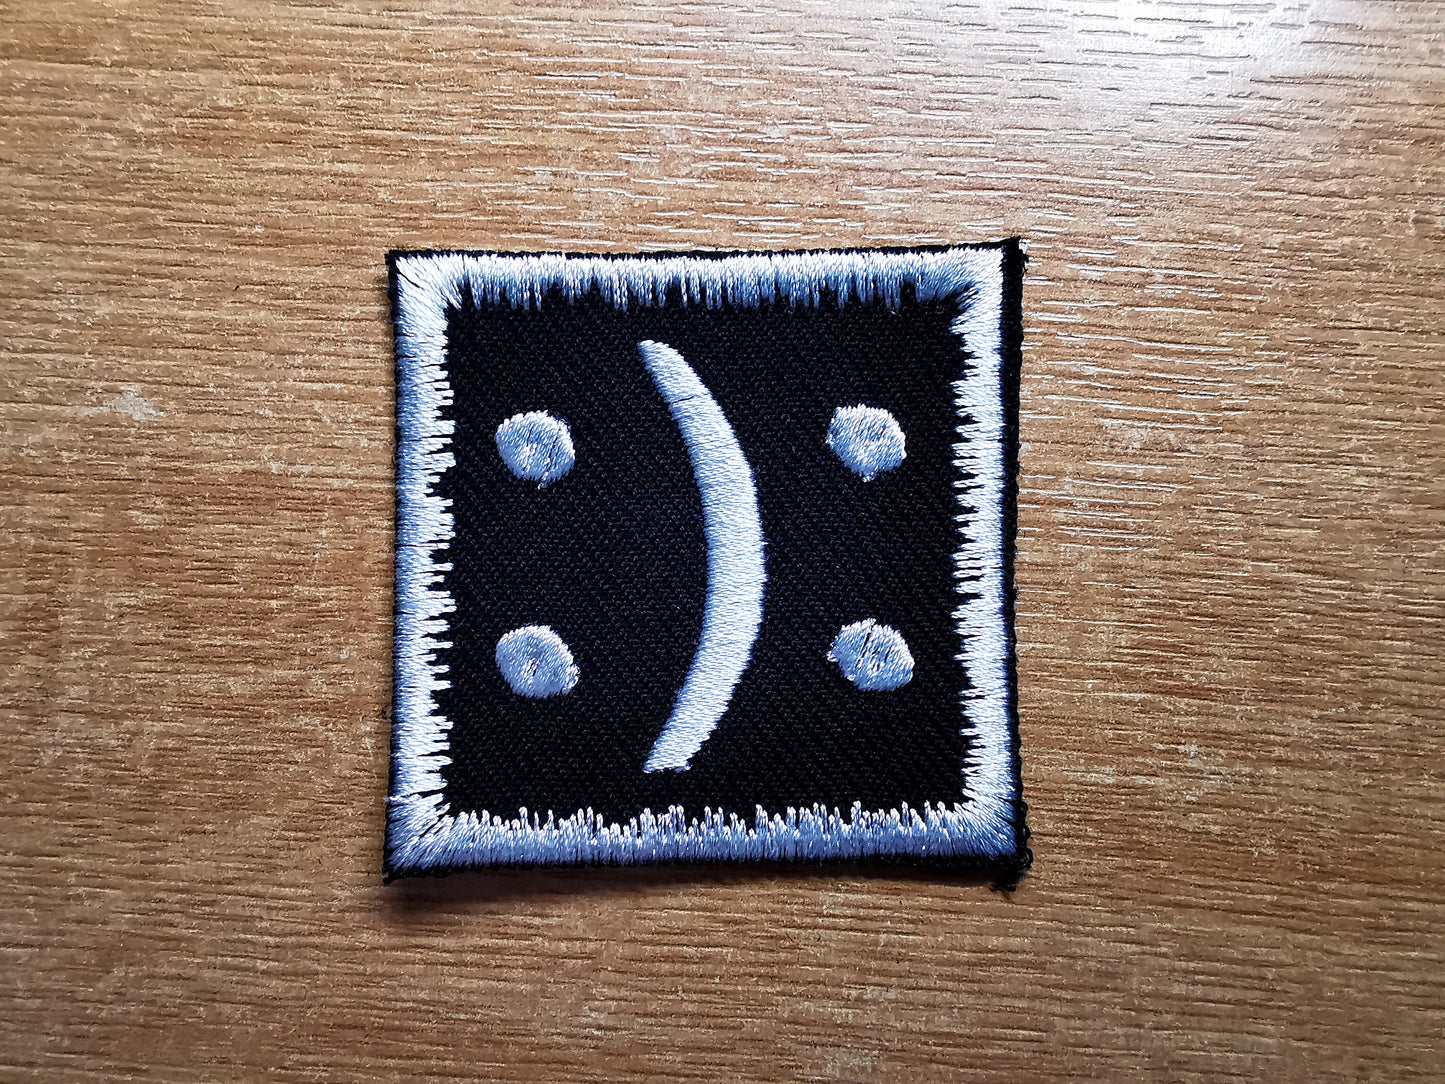 Bipolar Disorder Iron On Embroidered Patch Subtle Symbol for Disability and Mental Health Awareness